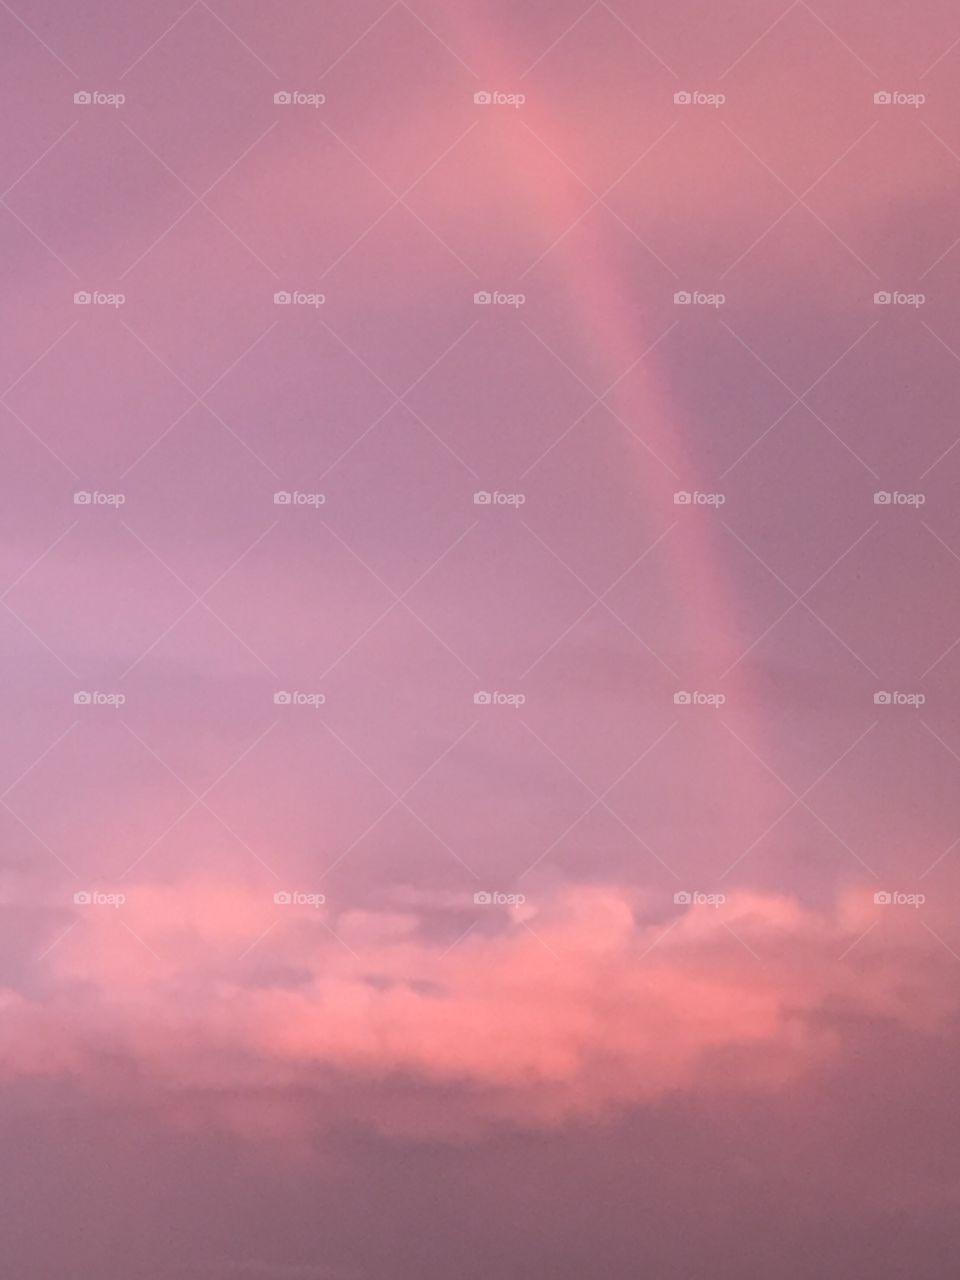 Rainbow in pink clouds